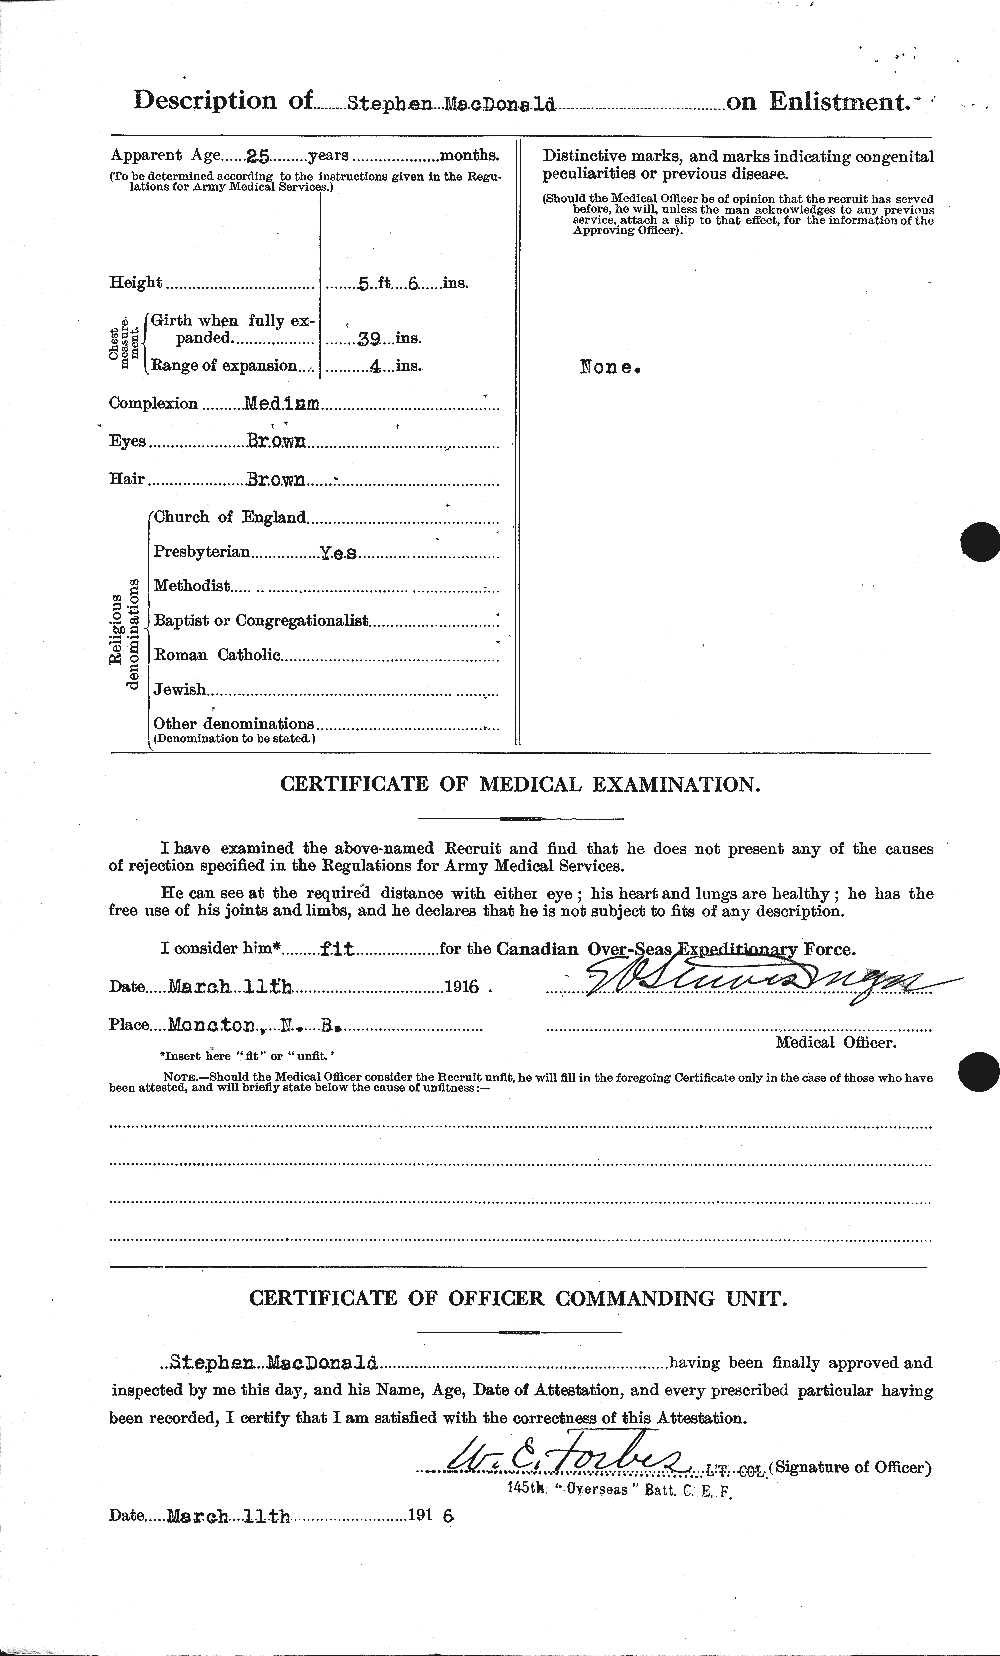 Personnel Records of the First World War - CEF 515921b